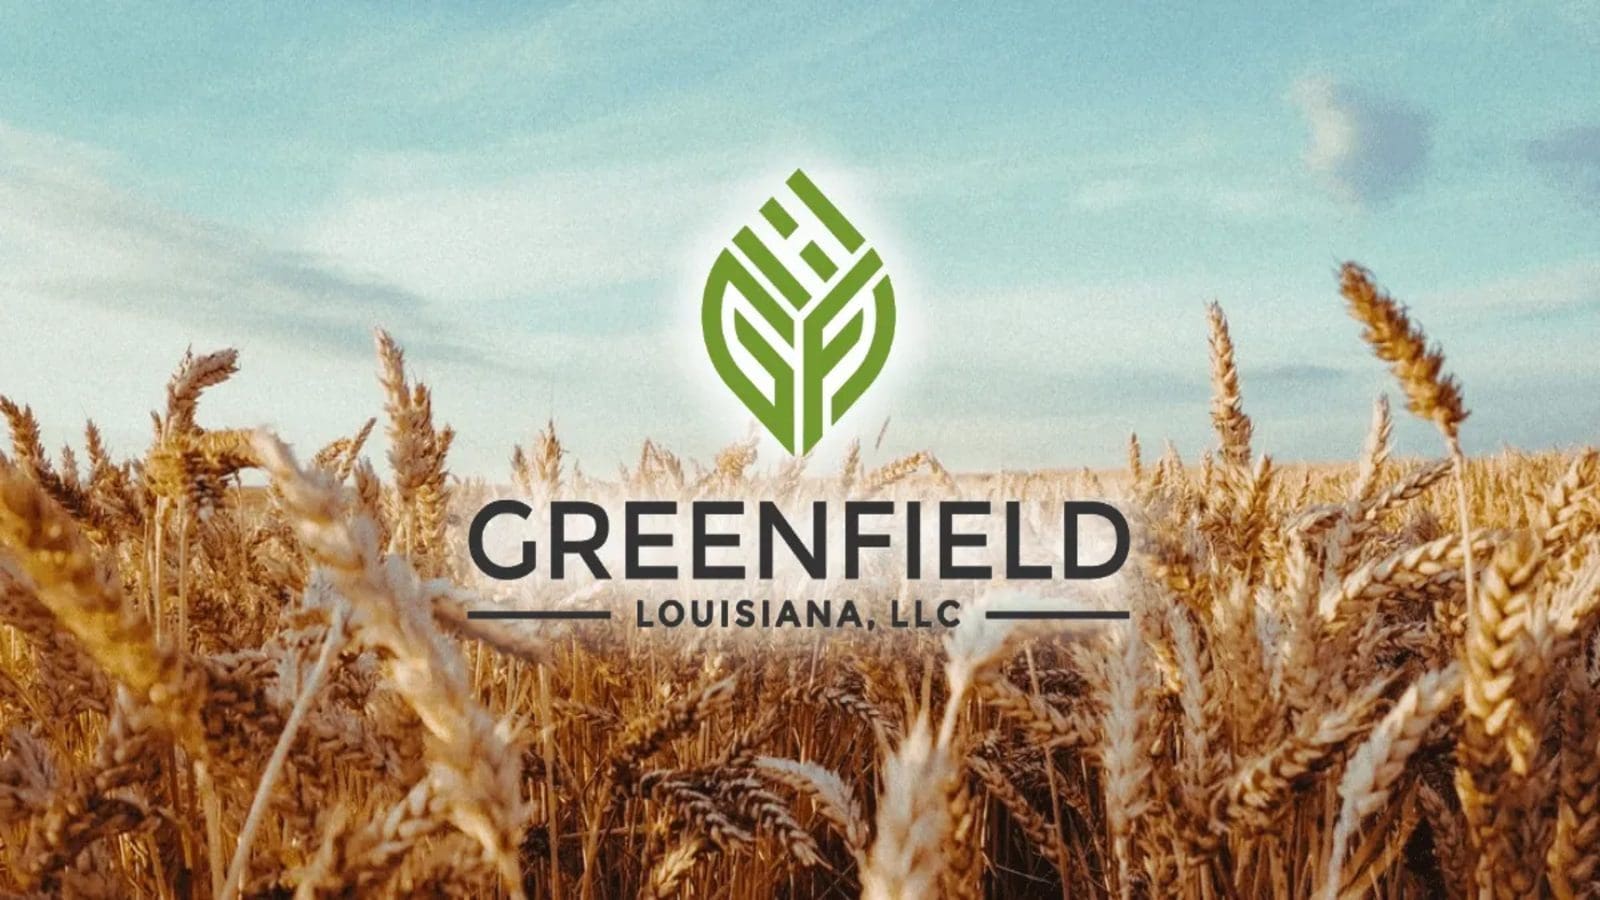 Greenfield proposed US$400 million export grain terminal to bolster local economy